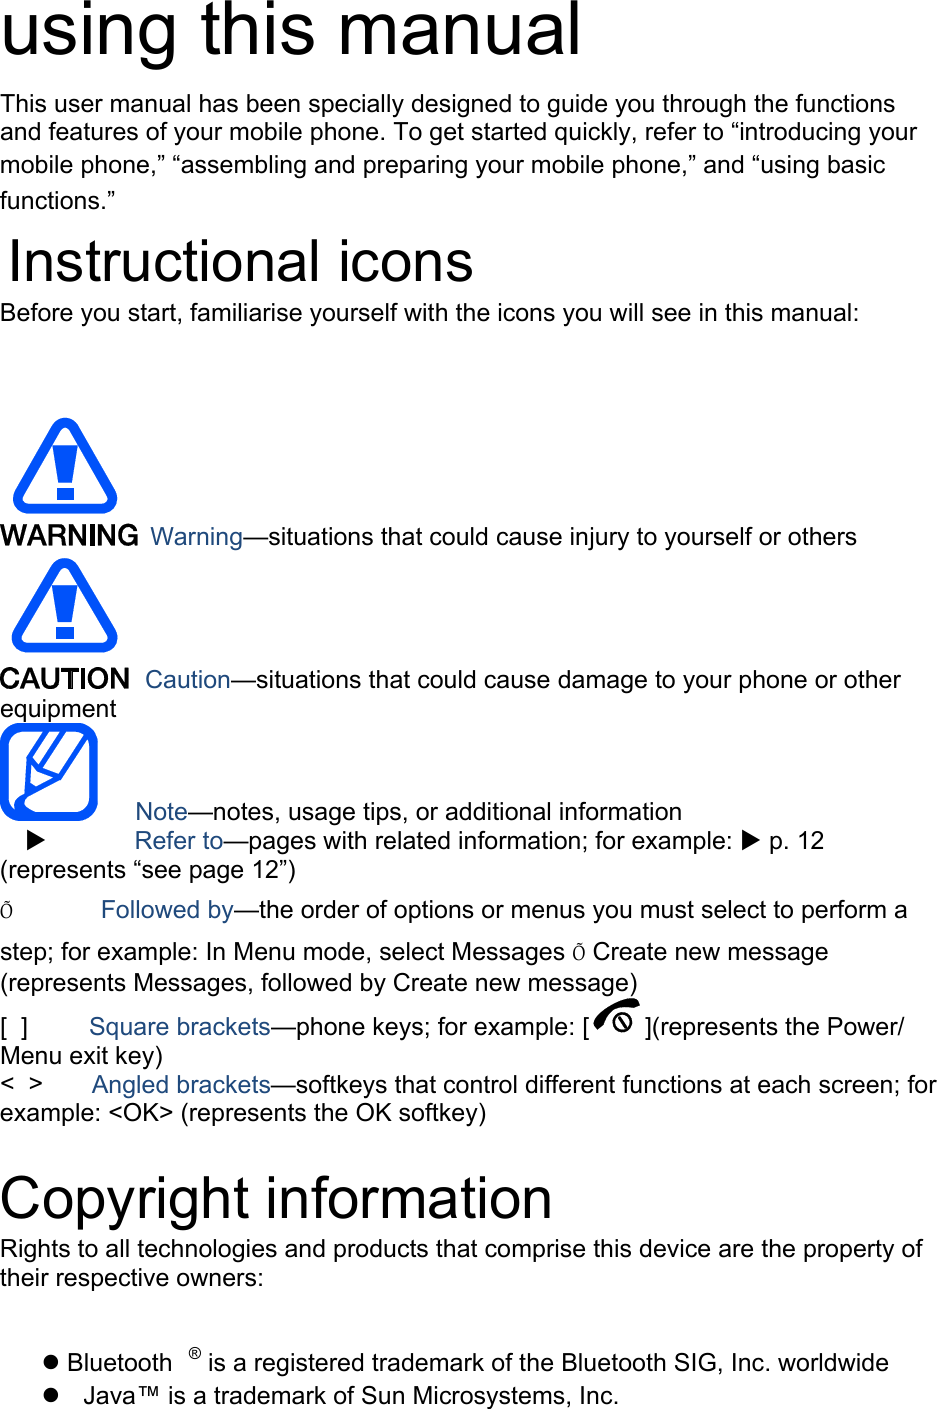 using this manual This user manual has been specially designed to guide you through the functions and features of your mobile phone. To get started quickly, refer to “introducing your mobile phone,” “assembling and preparing your mobile phone,” and “using basic functions.”  Instructional icons Before you start, familiarise yourself with the icons you will see in this manual:     Warning—situations that could cause injury to yourself or others  Caution—situations that could cause damage to your phone or other equipment    Note—notes, usage tips, or additional information          Refer to—pages with related information; for example:  p. 12 (represents “see page 12”) Õ       Followed by—the order of options or menus you must select to perform a step; for example: In Menu mode, select Messages Õ Create new message (represents Messages, followed by Create new message) [  ]     Square brackets—phone keys; for example: [ ](represents the Power/ Menu exit key) &lt;  &gt;    Angled brackets—softkeys that control different functions at each screen; for example: &lt;OK&gt; (represents the OK softkey)  Copyright information Rights to all technologies and products that comprise this device are the property of their respective owners:   Bluetooth ® is a registered trademark of the Bluetooth SIG, Inc. worldwide   Java™ is a trademark of Sun Microsystems, Inc. 